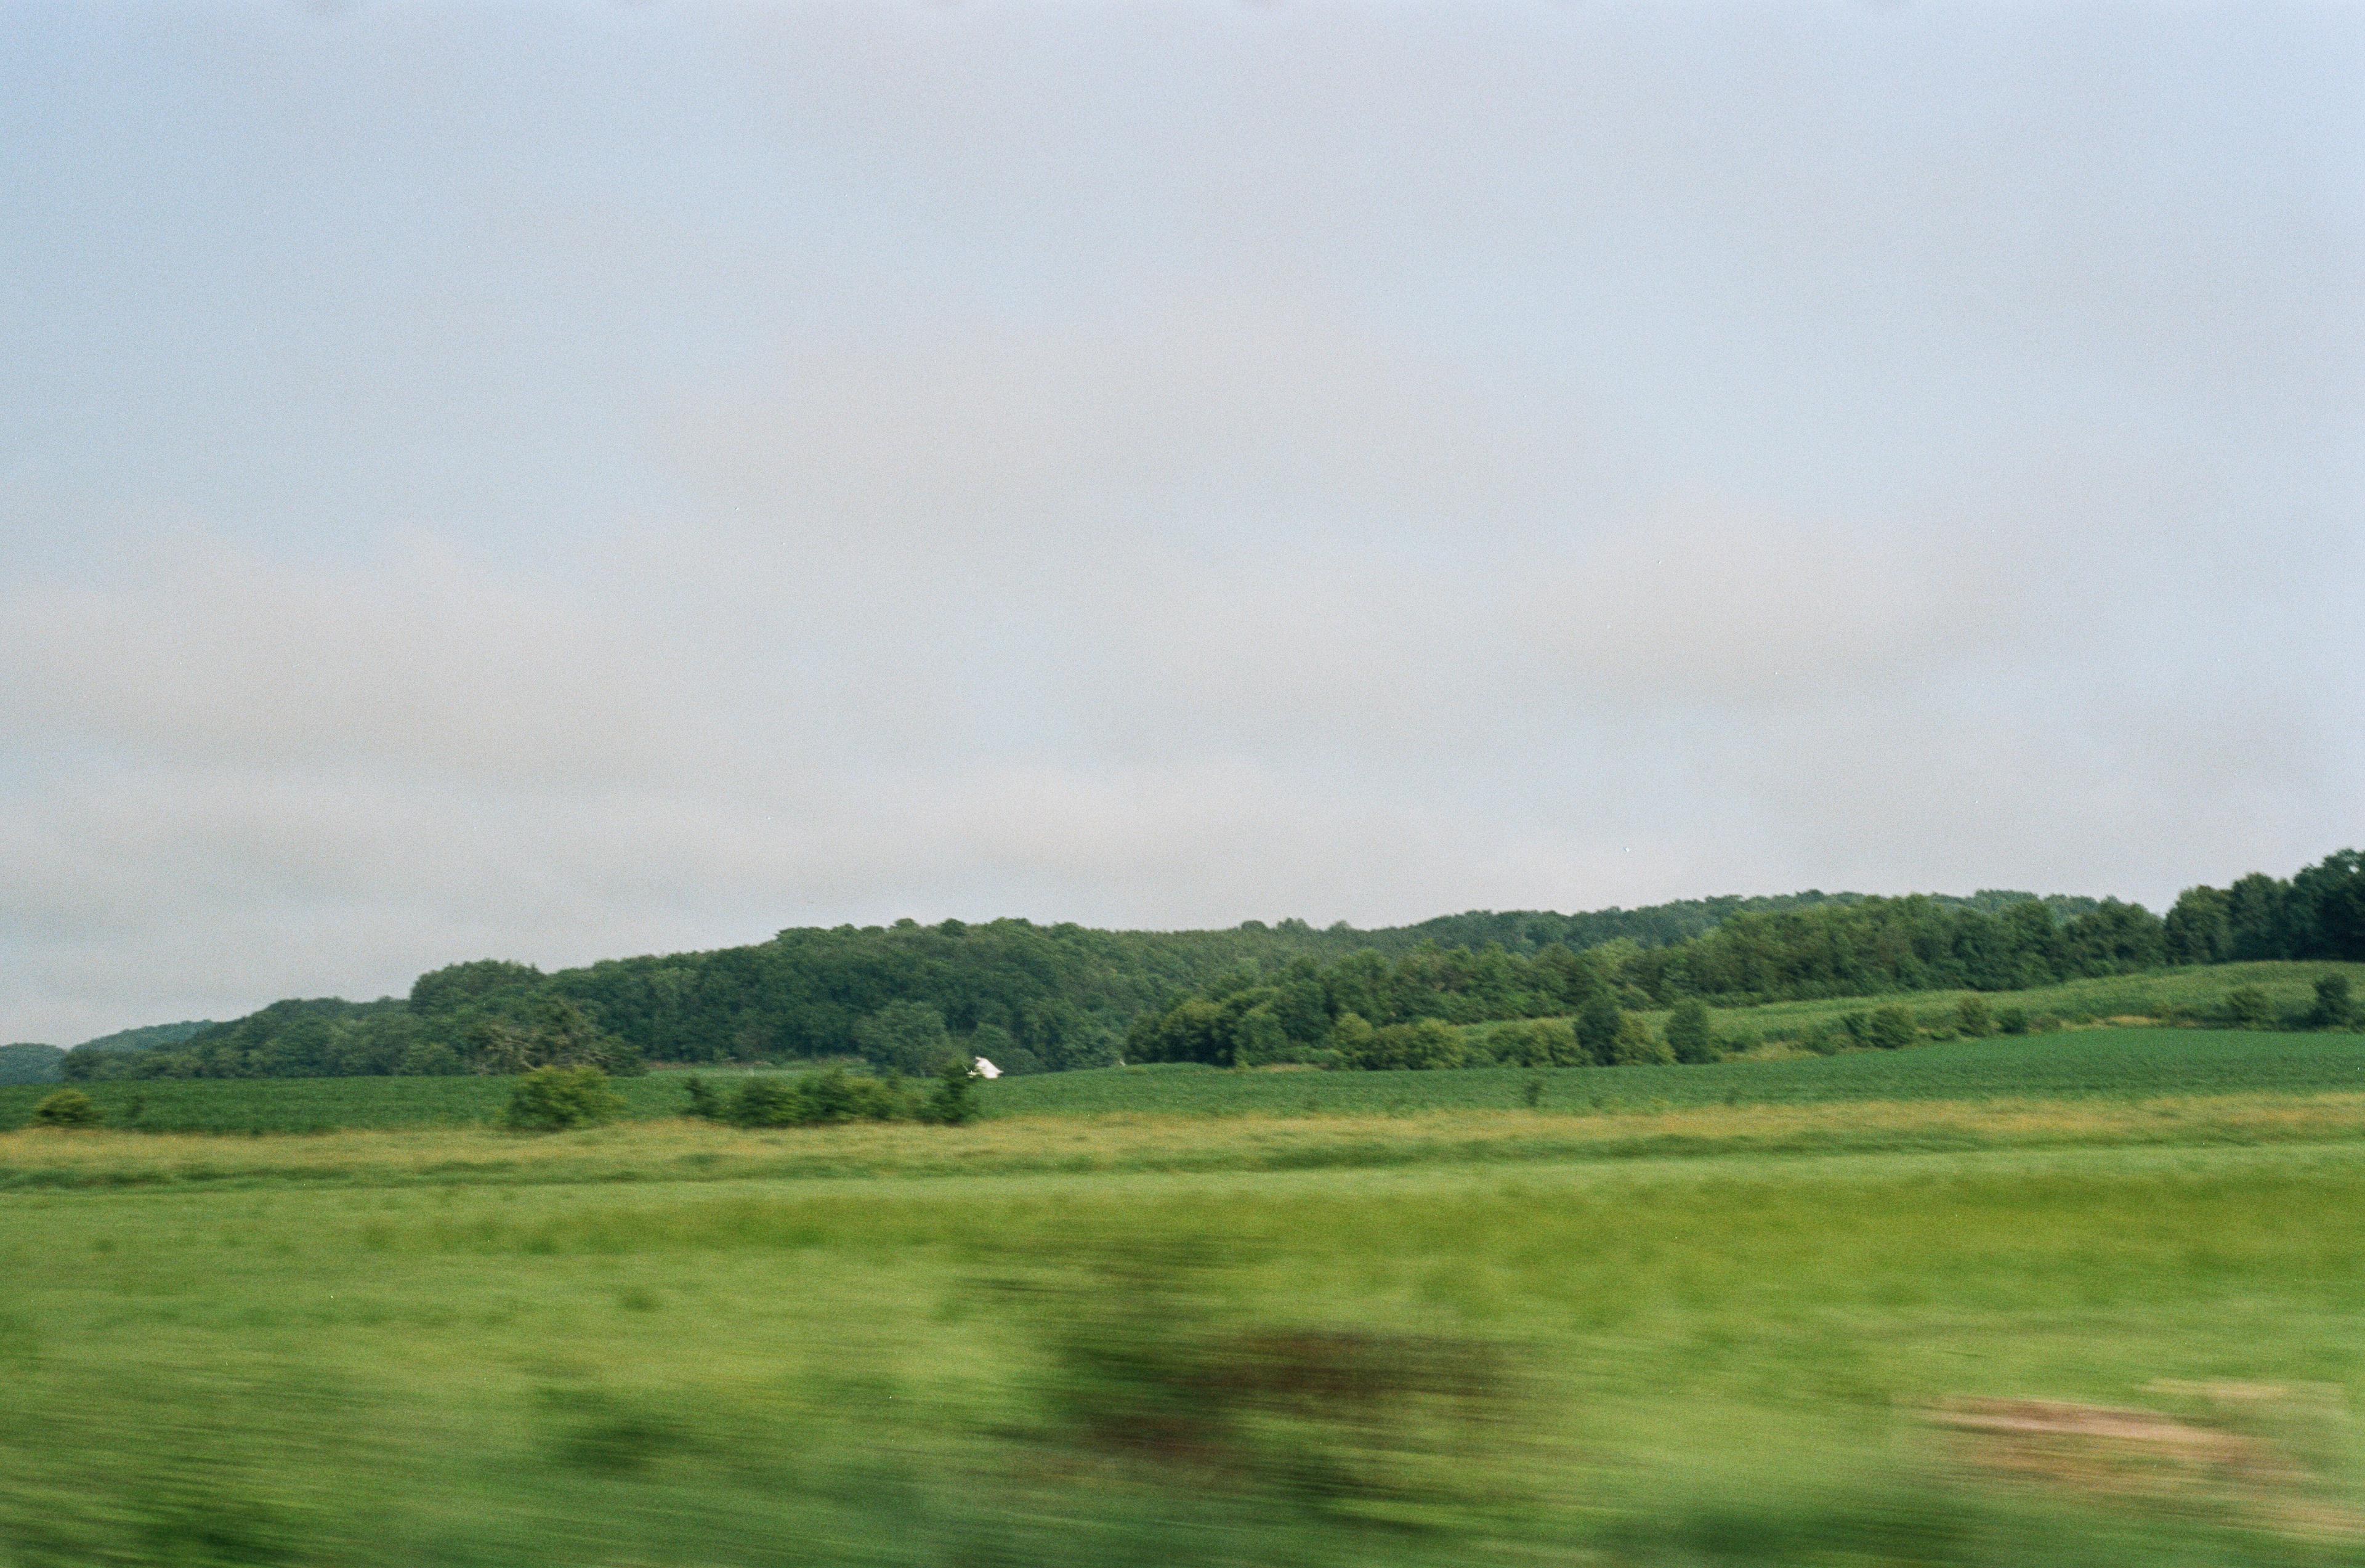 View of trees from a car window